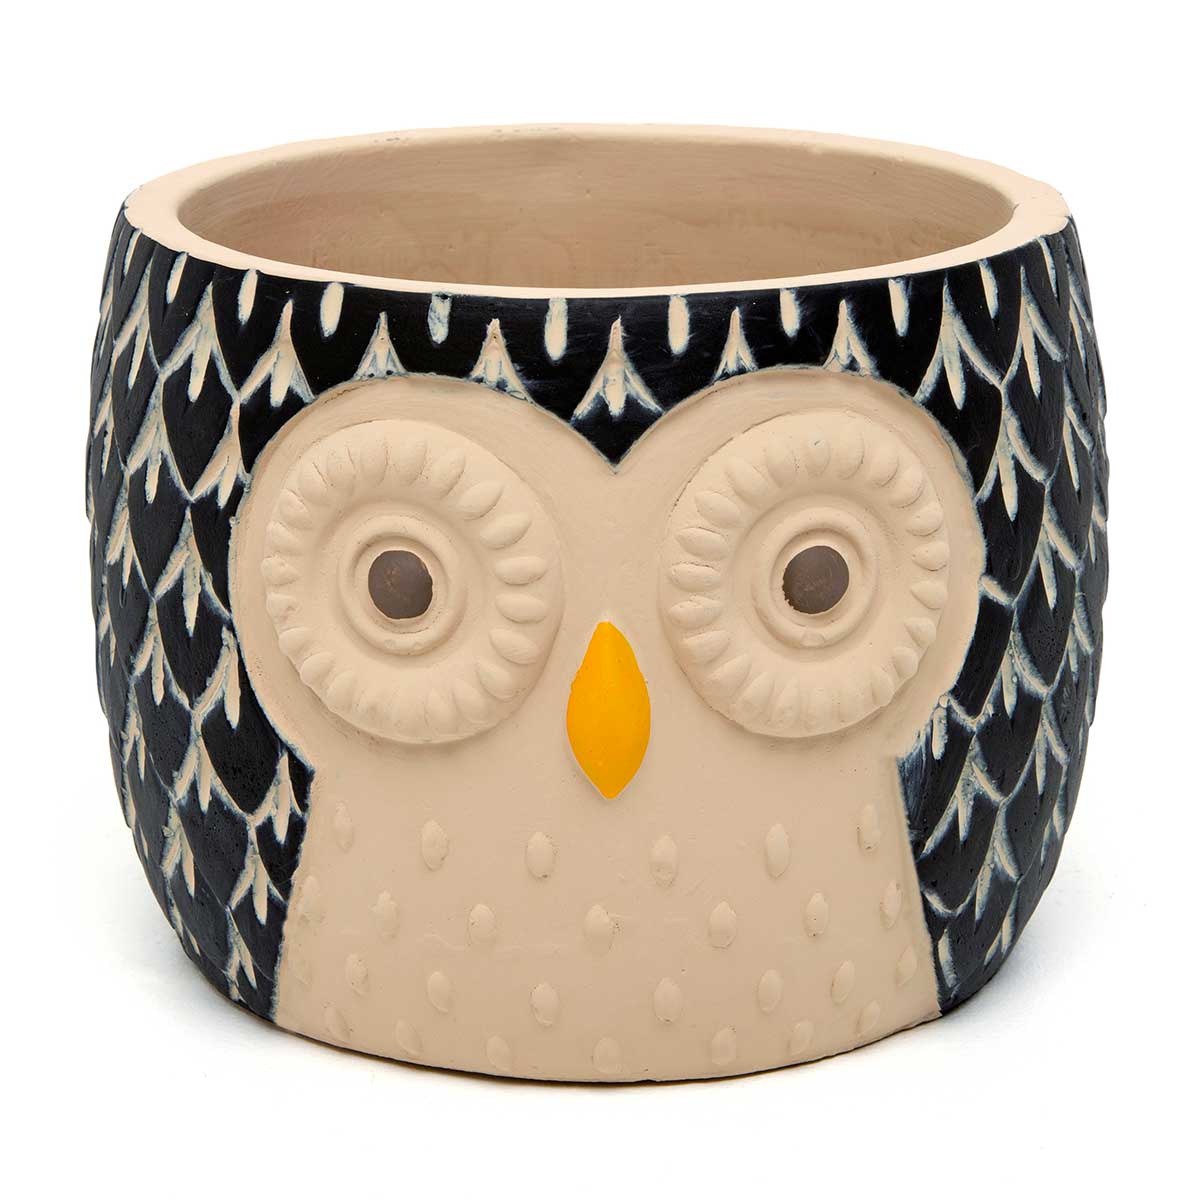 POT HOOTIE OWL LARGE 6IN X 5IN BLACK/BEIGE CONCRETE - Click Image to Close